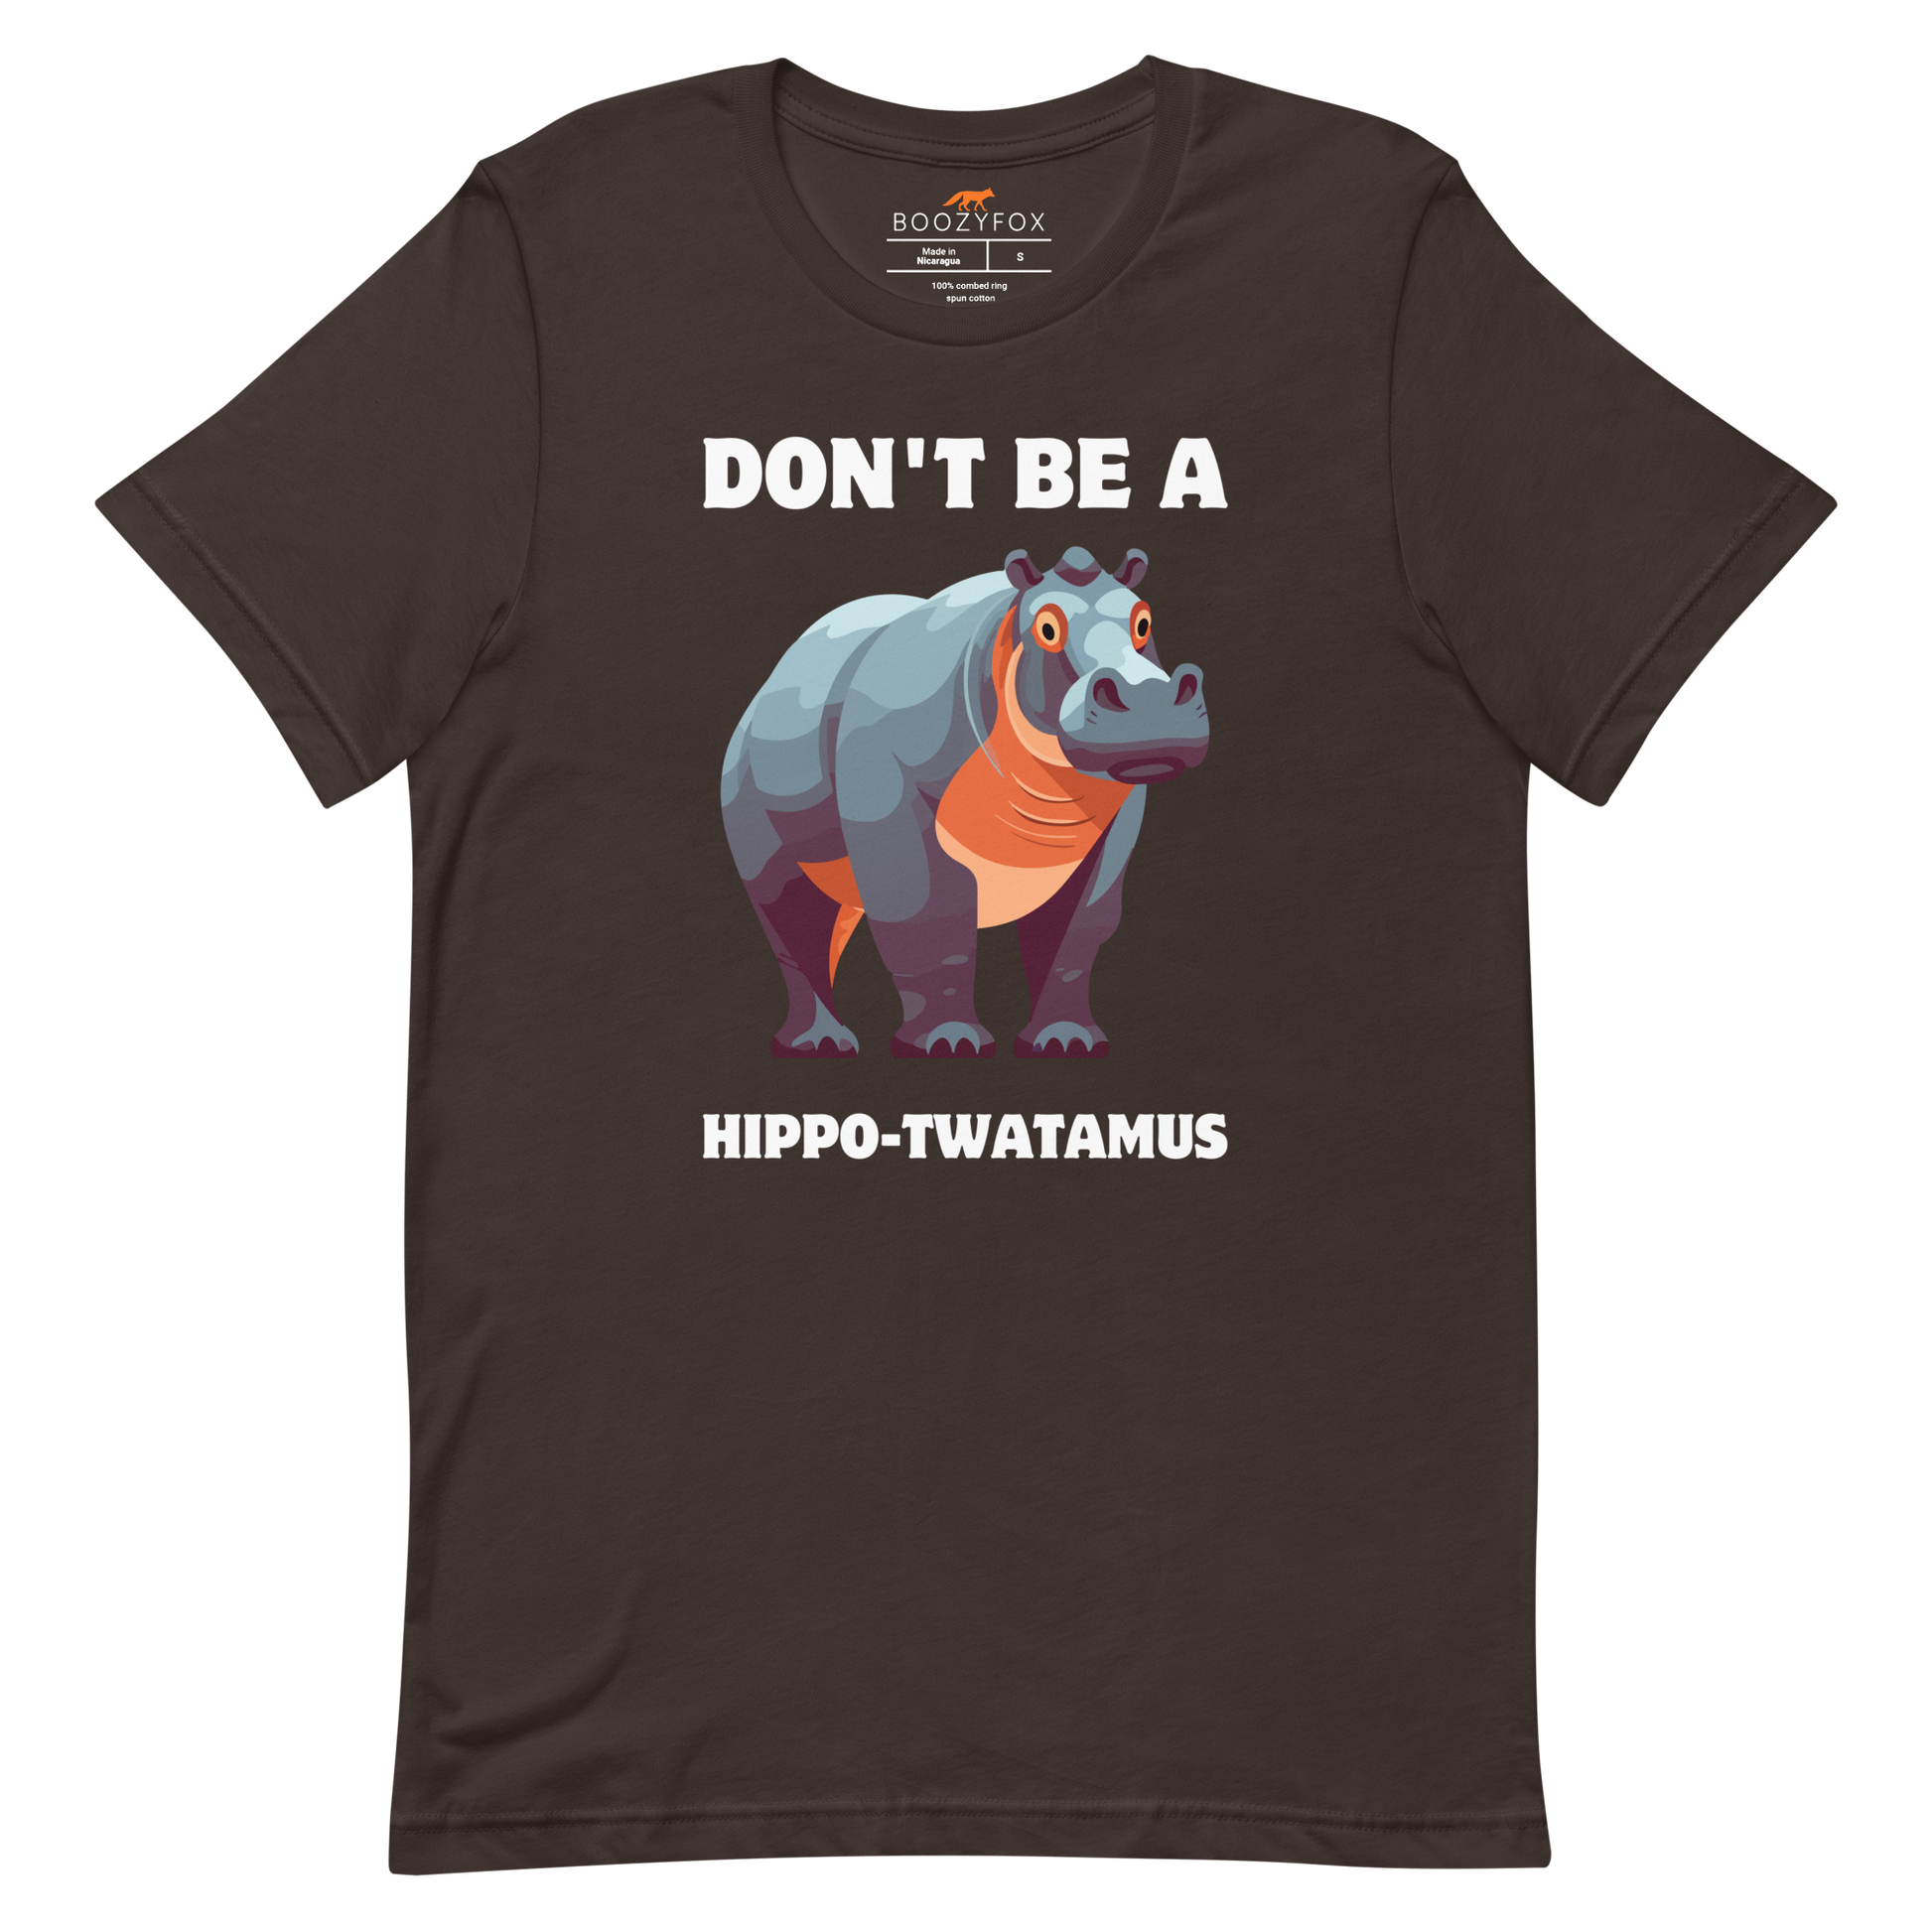 Brown Premium Hippo Tee featuring a Don't Be a Hippo-Twatamus graphic on the chest - Funny Graphic Hippo Tees - Boozy Fox